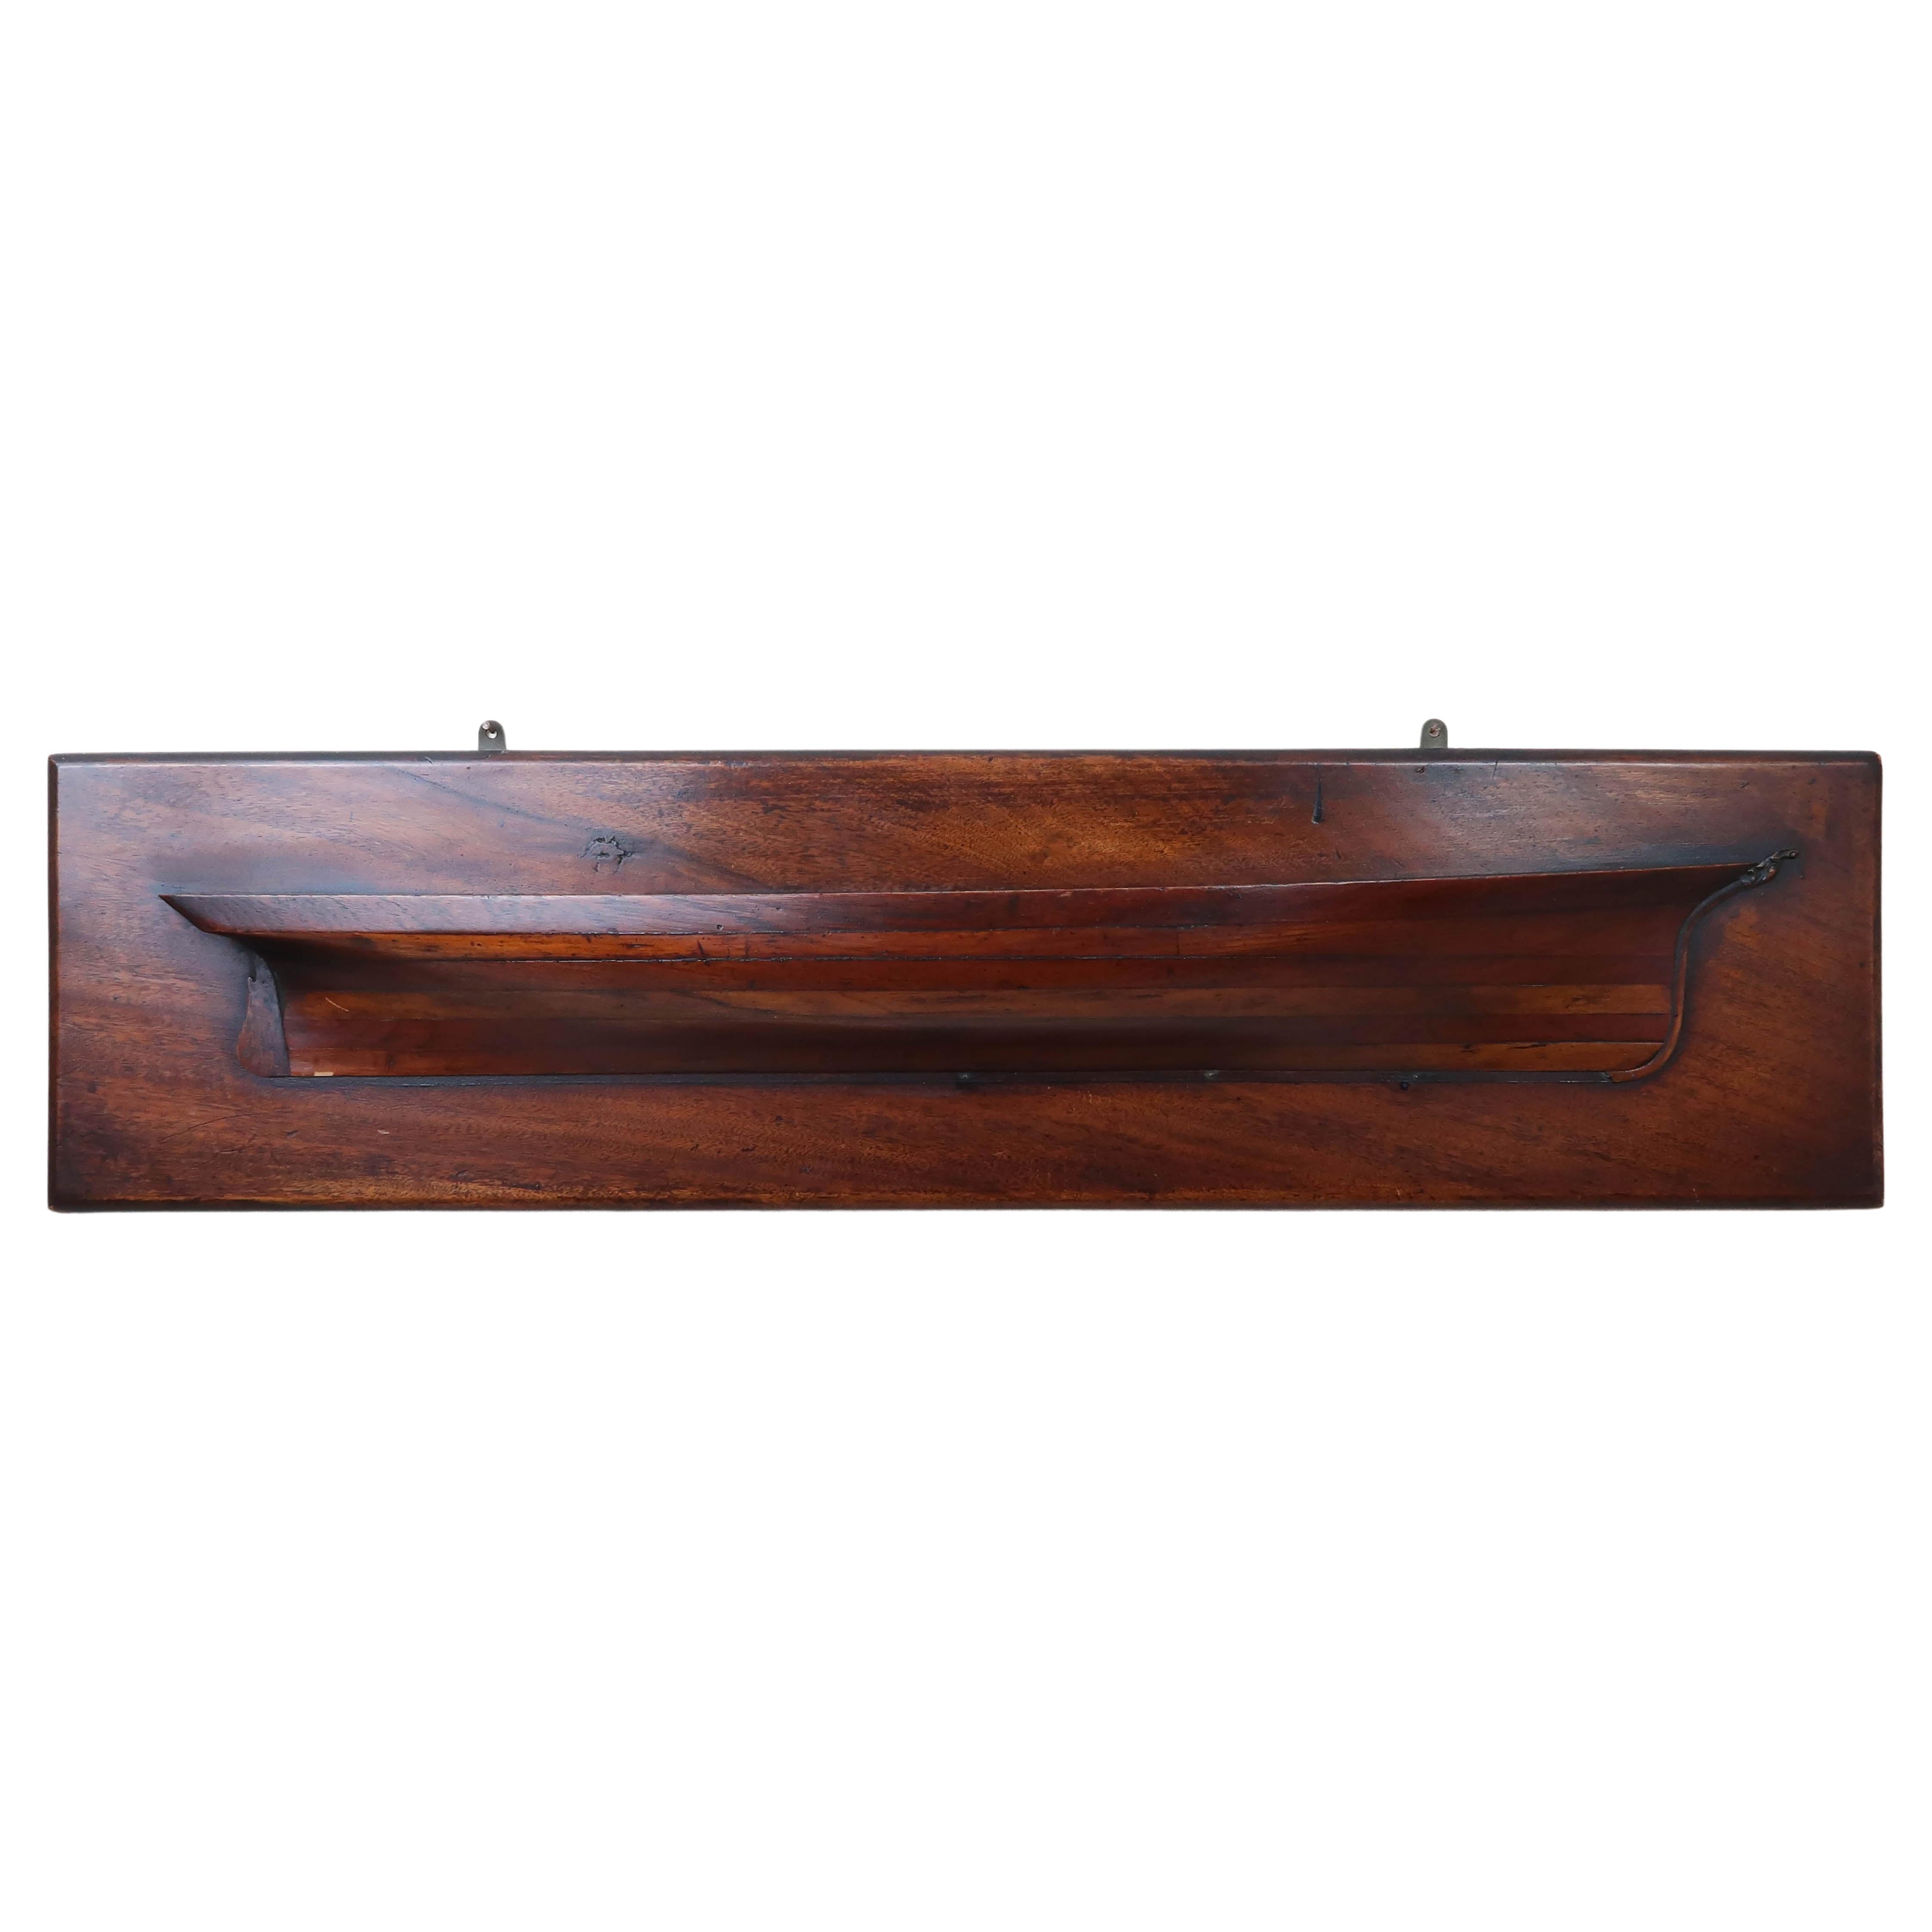 Wonderful half hull model.

Laminated tropical hardwood and pitch pine

Original patina and a fantastic colour

Exceptional quality.  I particularly like the finely carved mast.

There is a tiny sliver of veneer missing at the very bottom of the